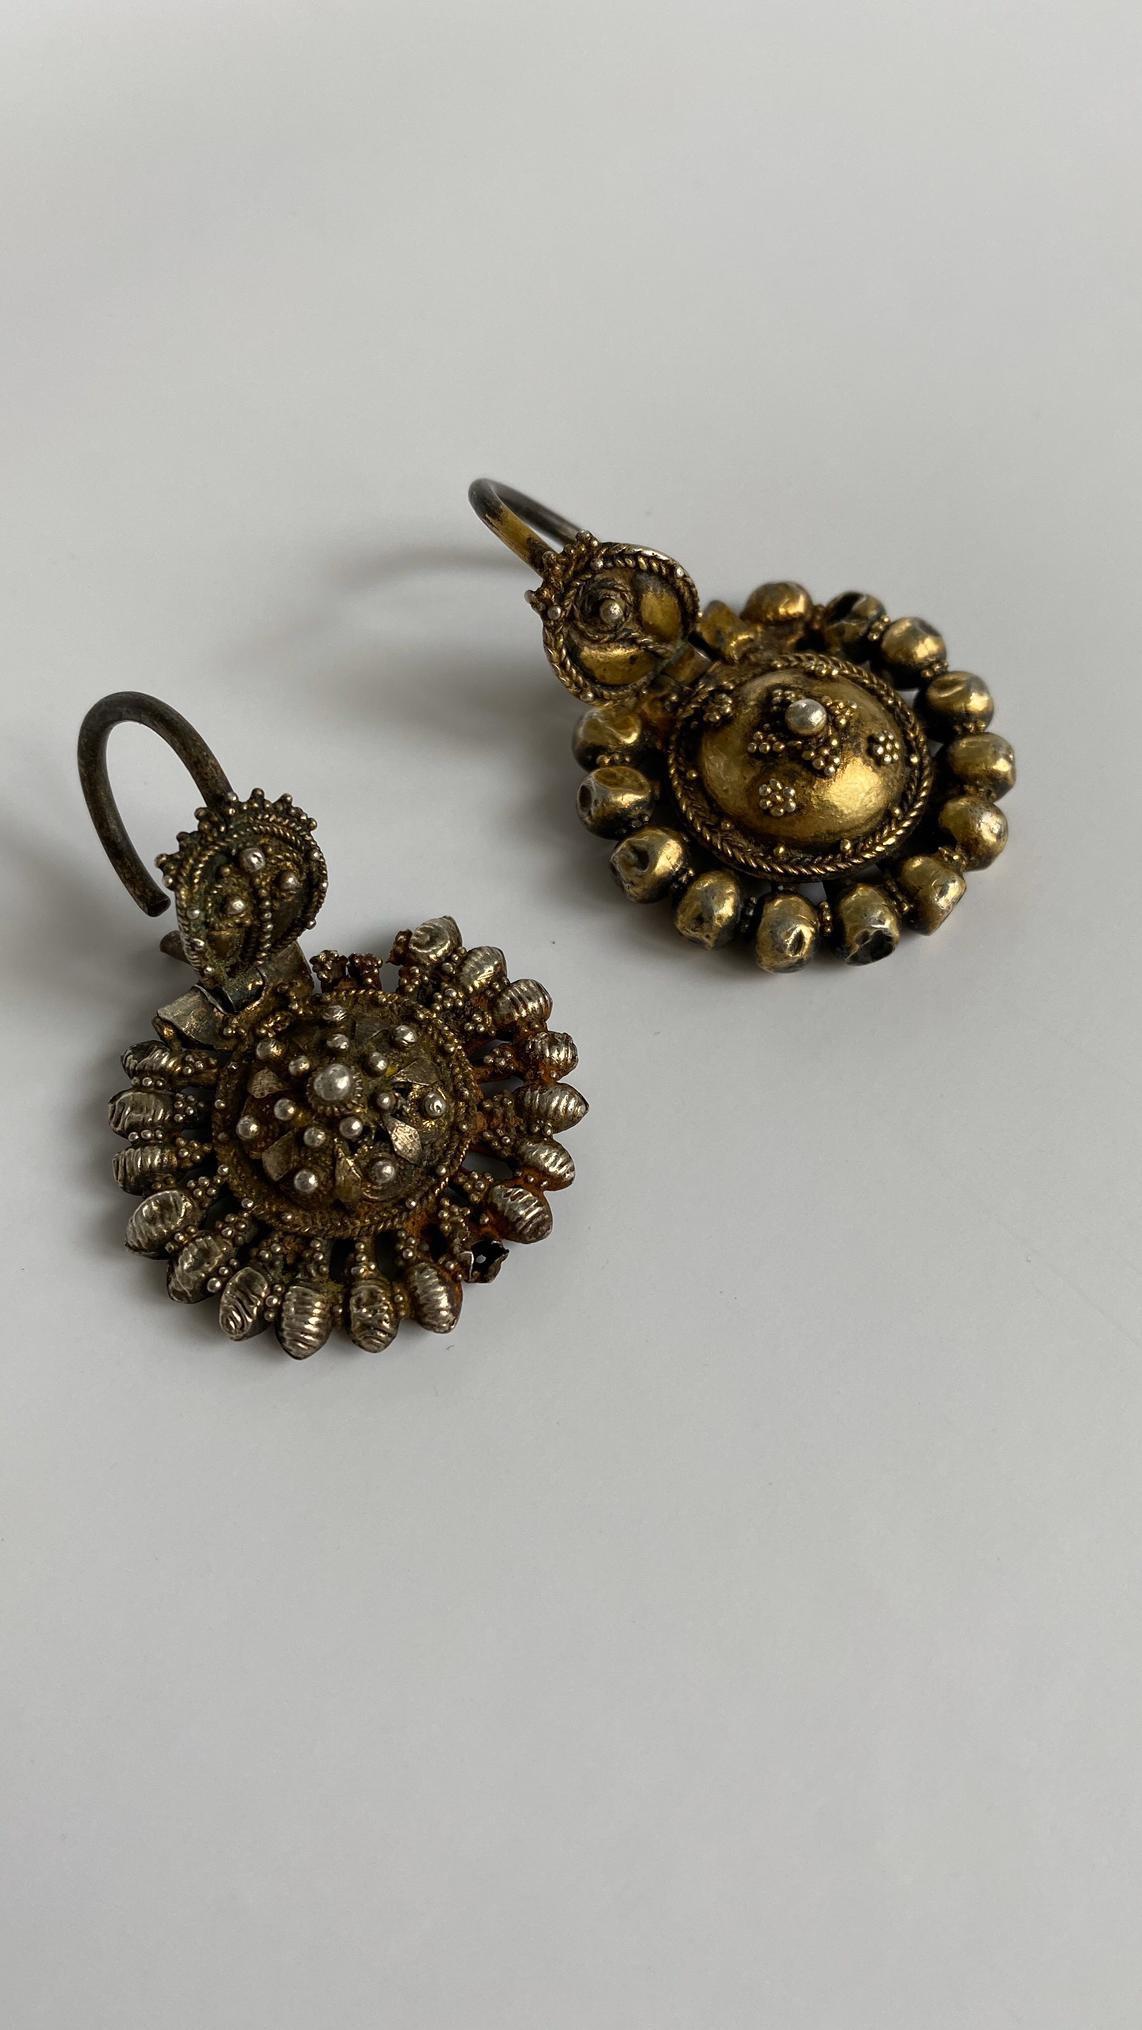 Authentic Pair of earrings ('arpalii) comes from its origin town Vidin in Bulgaria.
Silver-gilt, in the form of a central rosette with applied beadwork, surrounded by a series of rod and bead elements all with pattern grainwork or granulation,